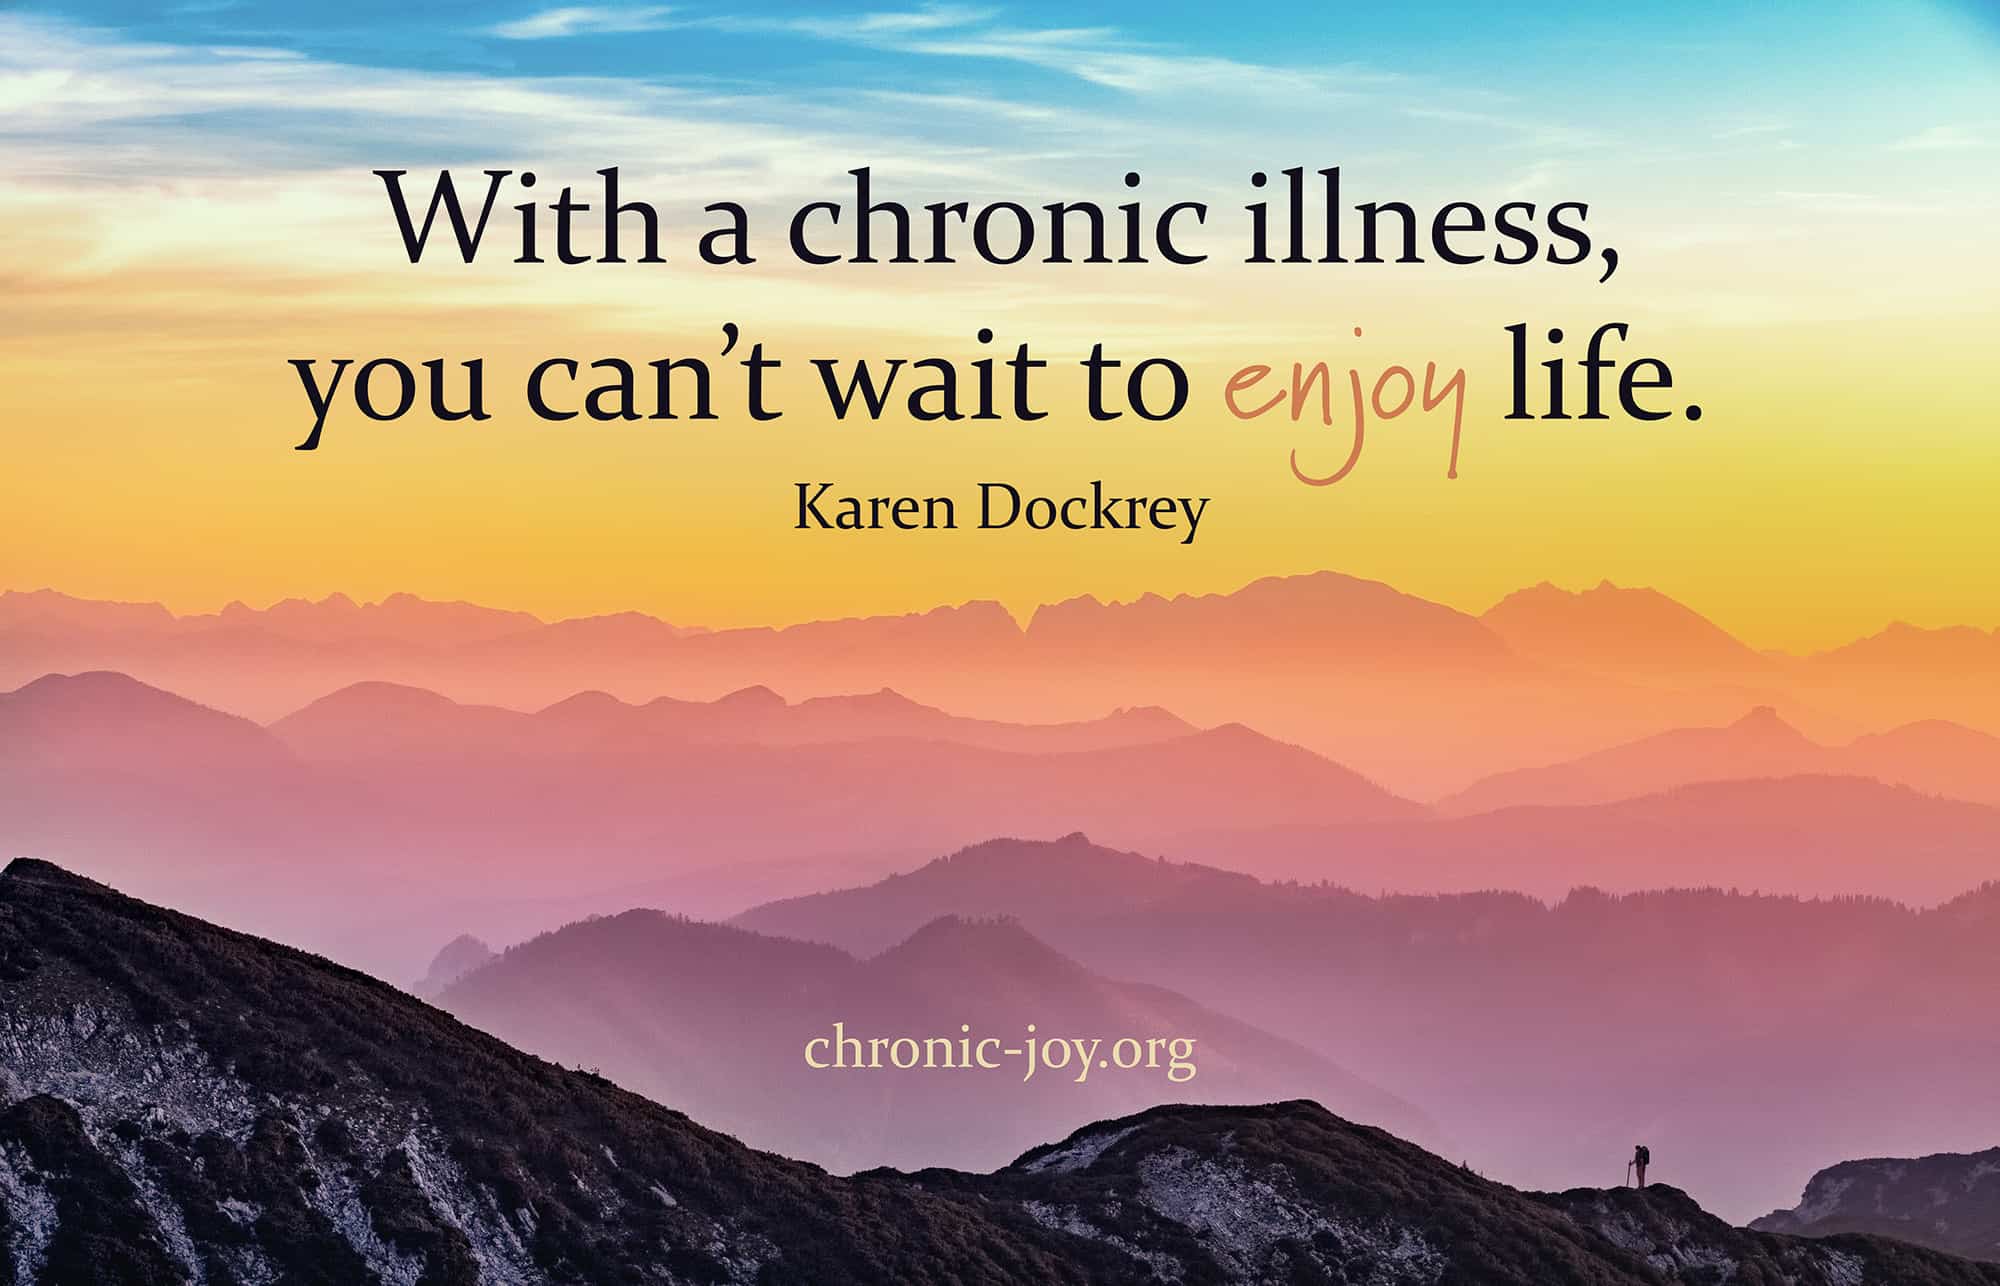 With a chronic illness, you can't wait to enjoy life.